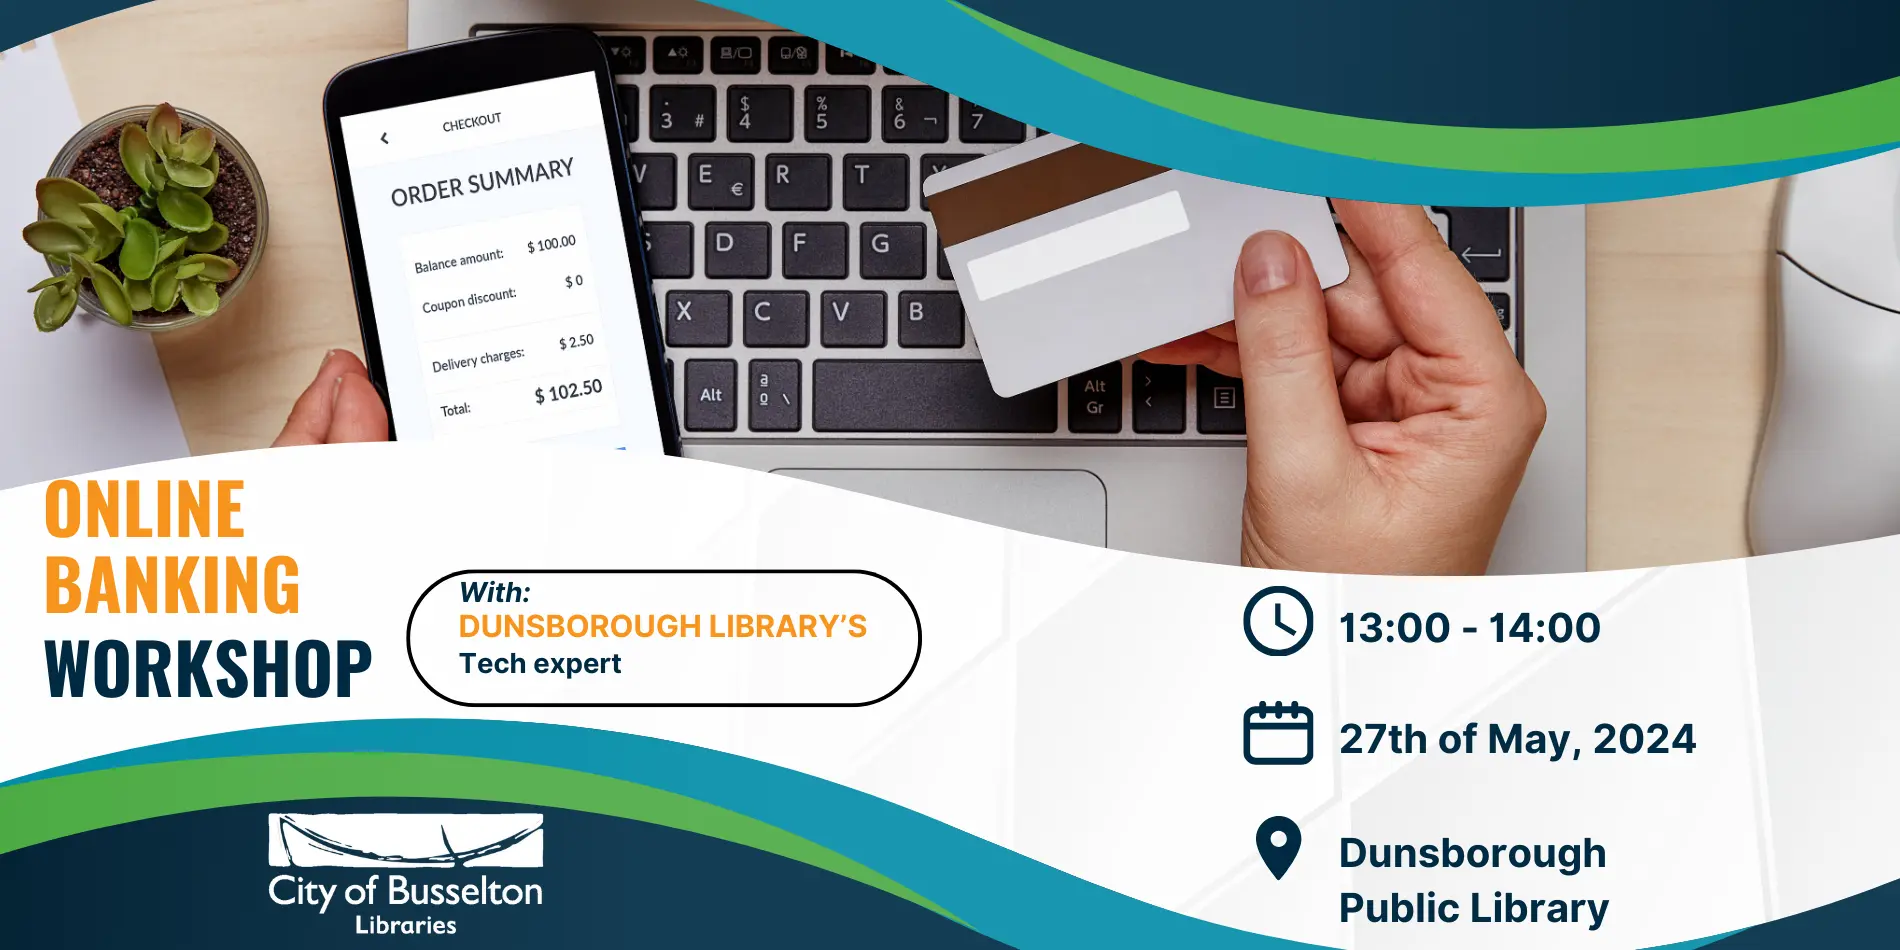 Dunsborough Online banking Workshop, will be held on Monday the 27th of May 2024 at 1pm.